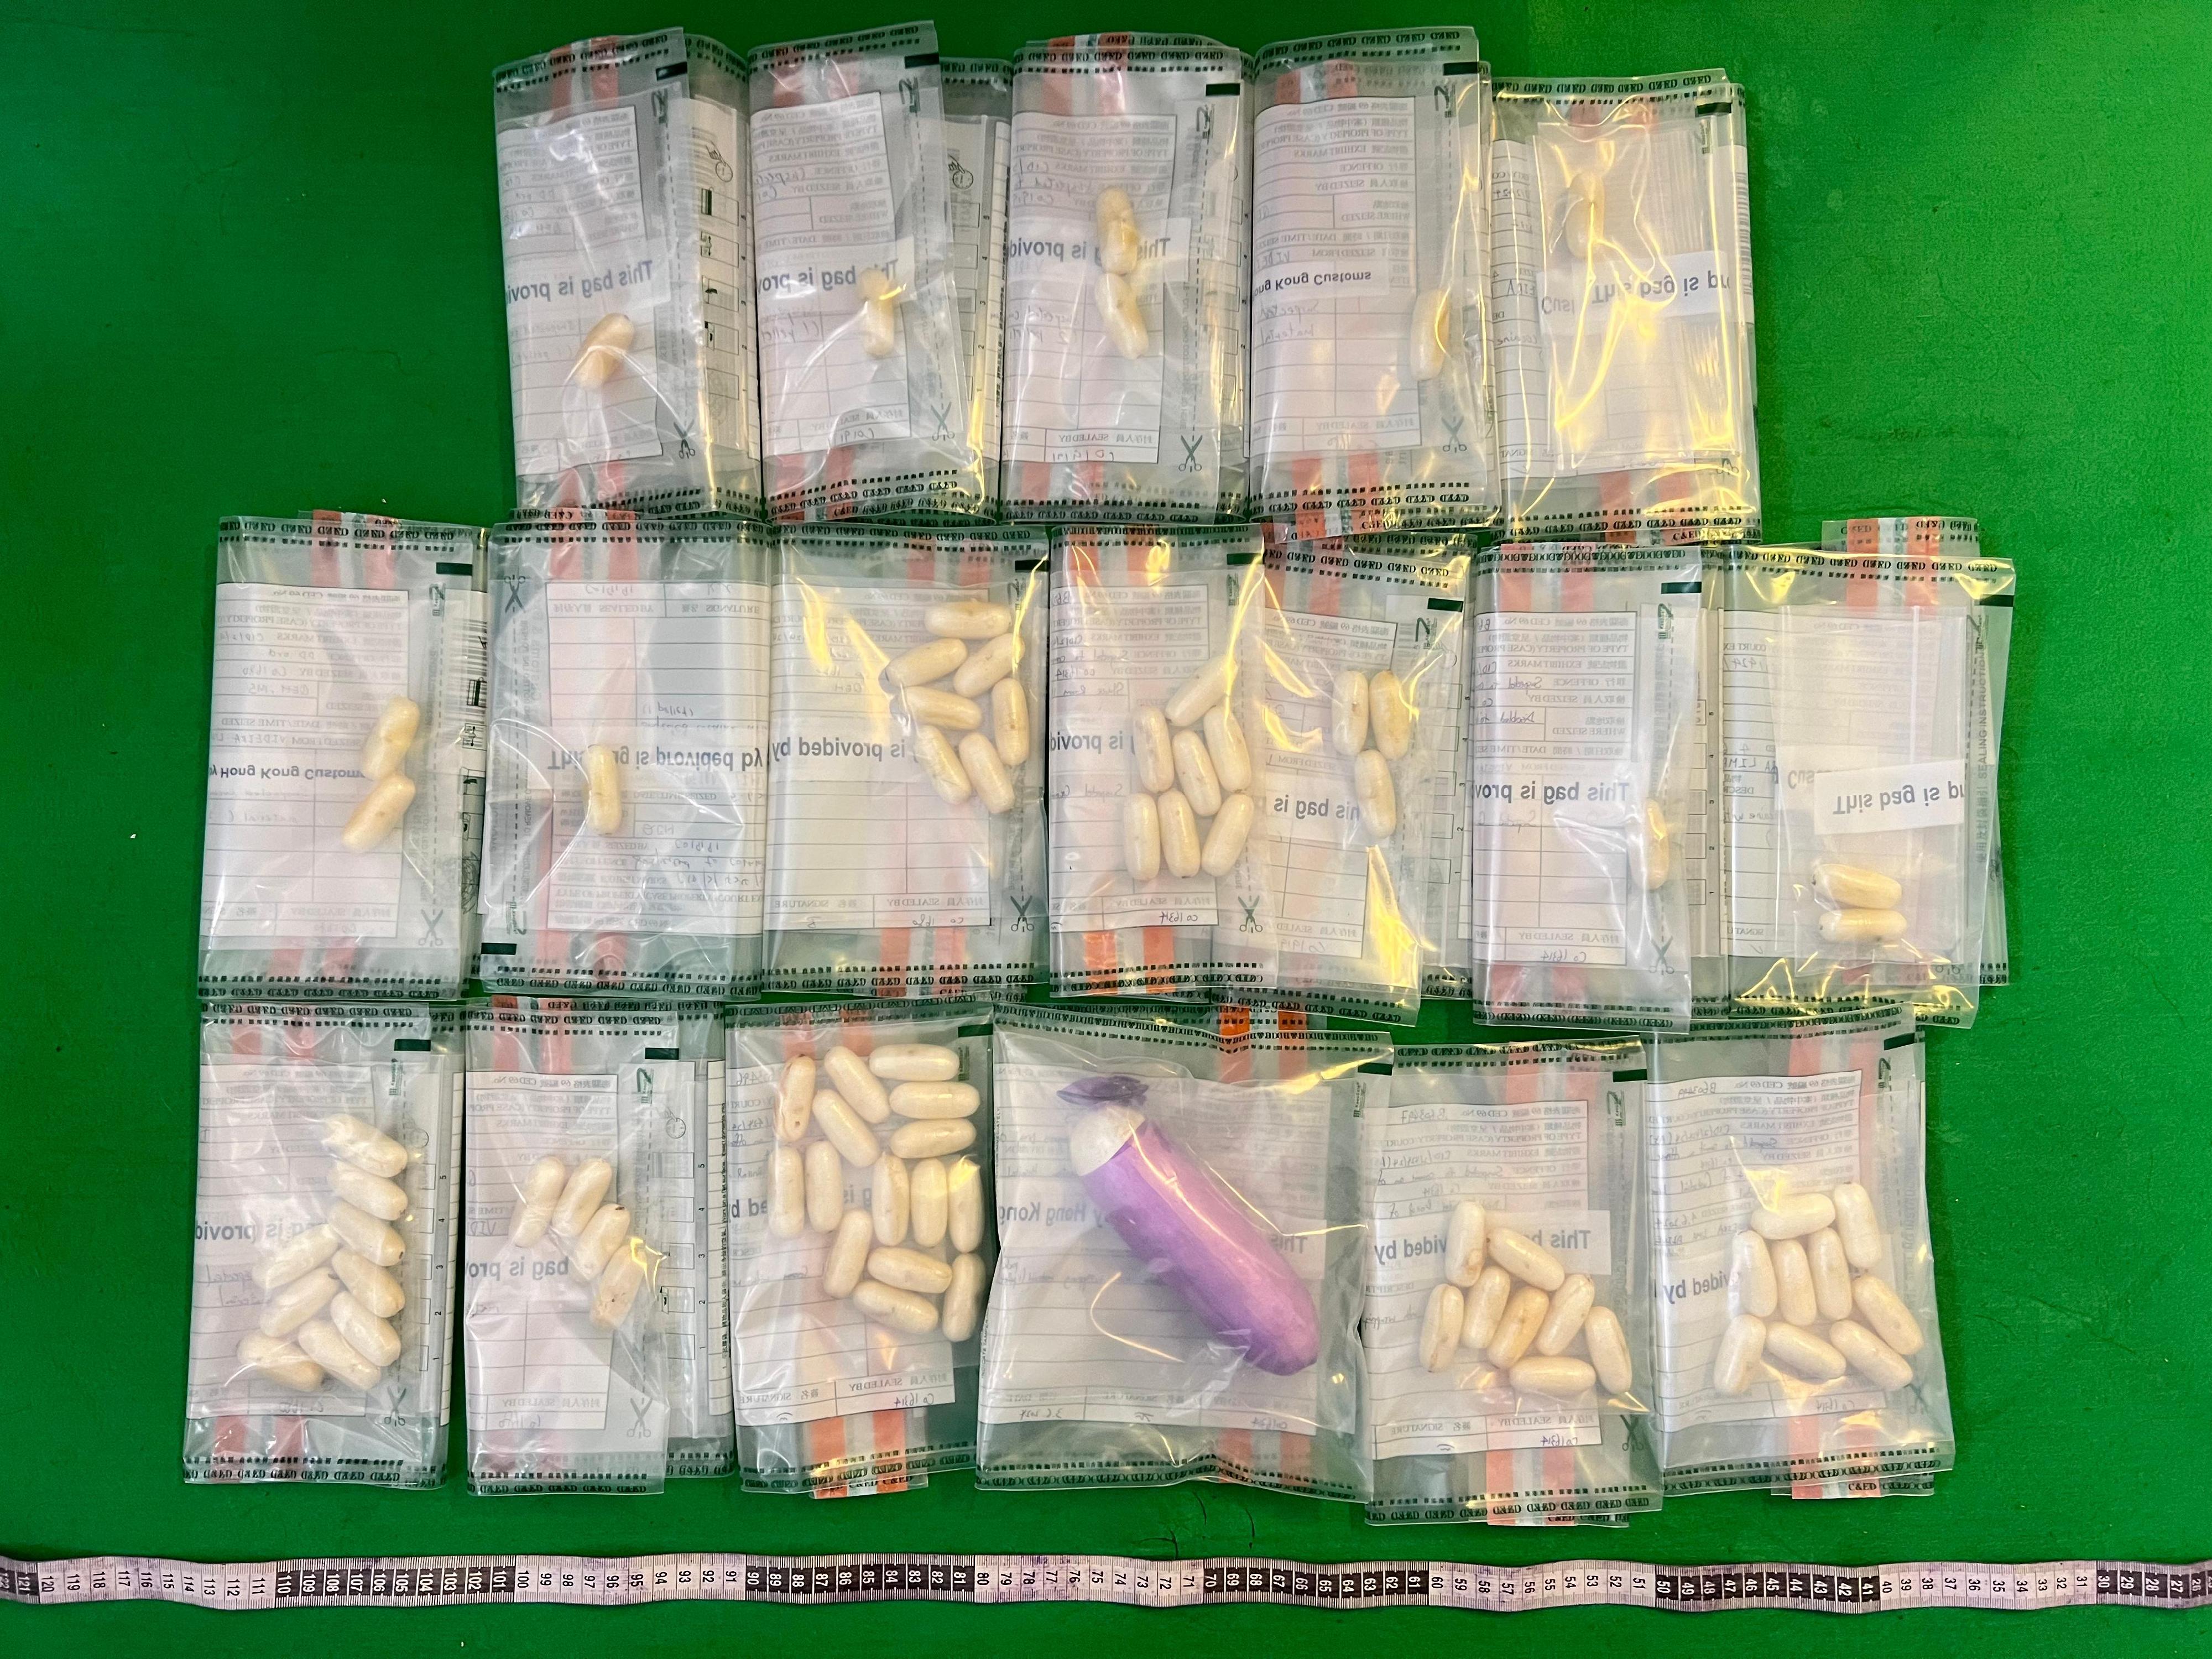 Hong Kong Customs detected a dangerous drugs case involving internal concealment at Hong Kong International Airport on June 3 and seized about 700 grams of suspected cocaine with an estimated market value of about $600,000. Photo shows the suspected cocaine seized.

